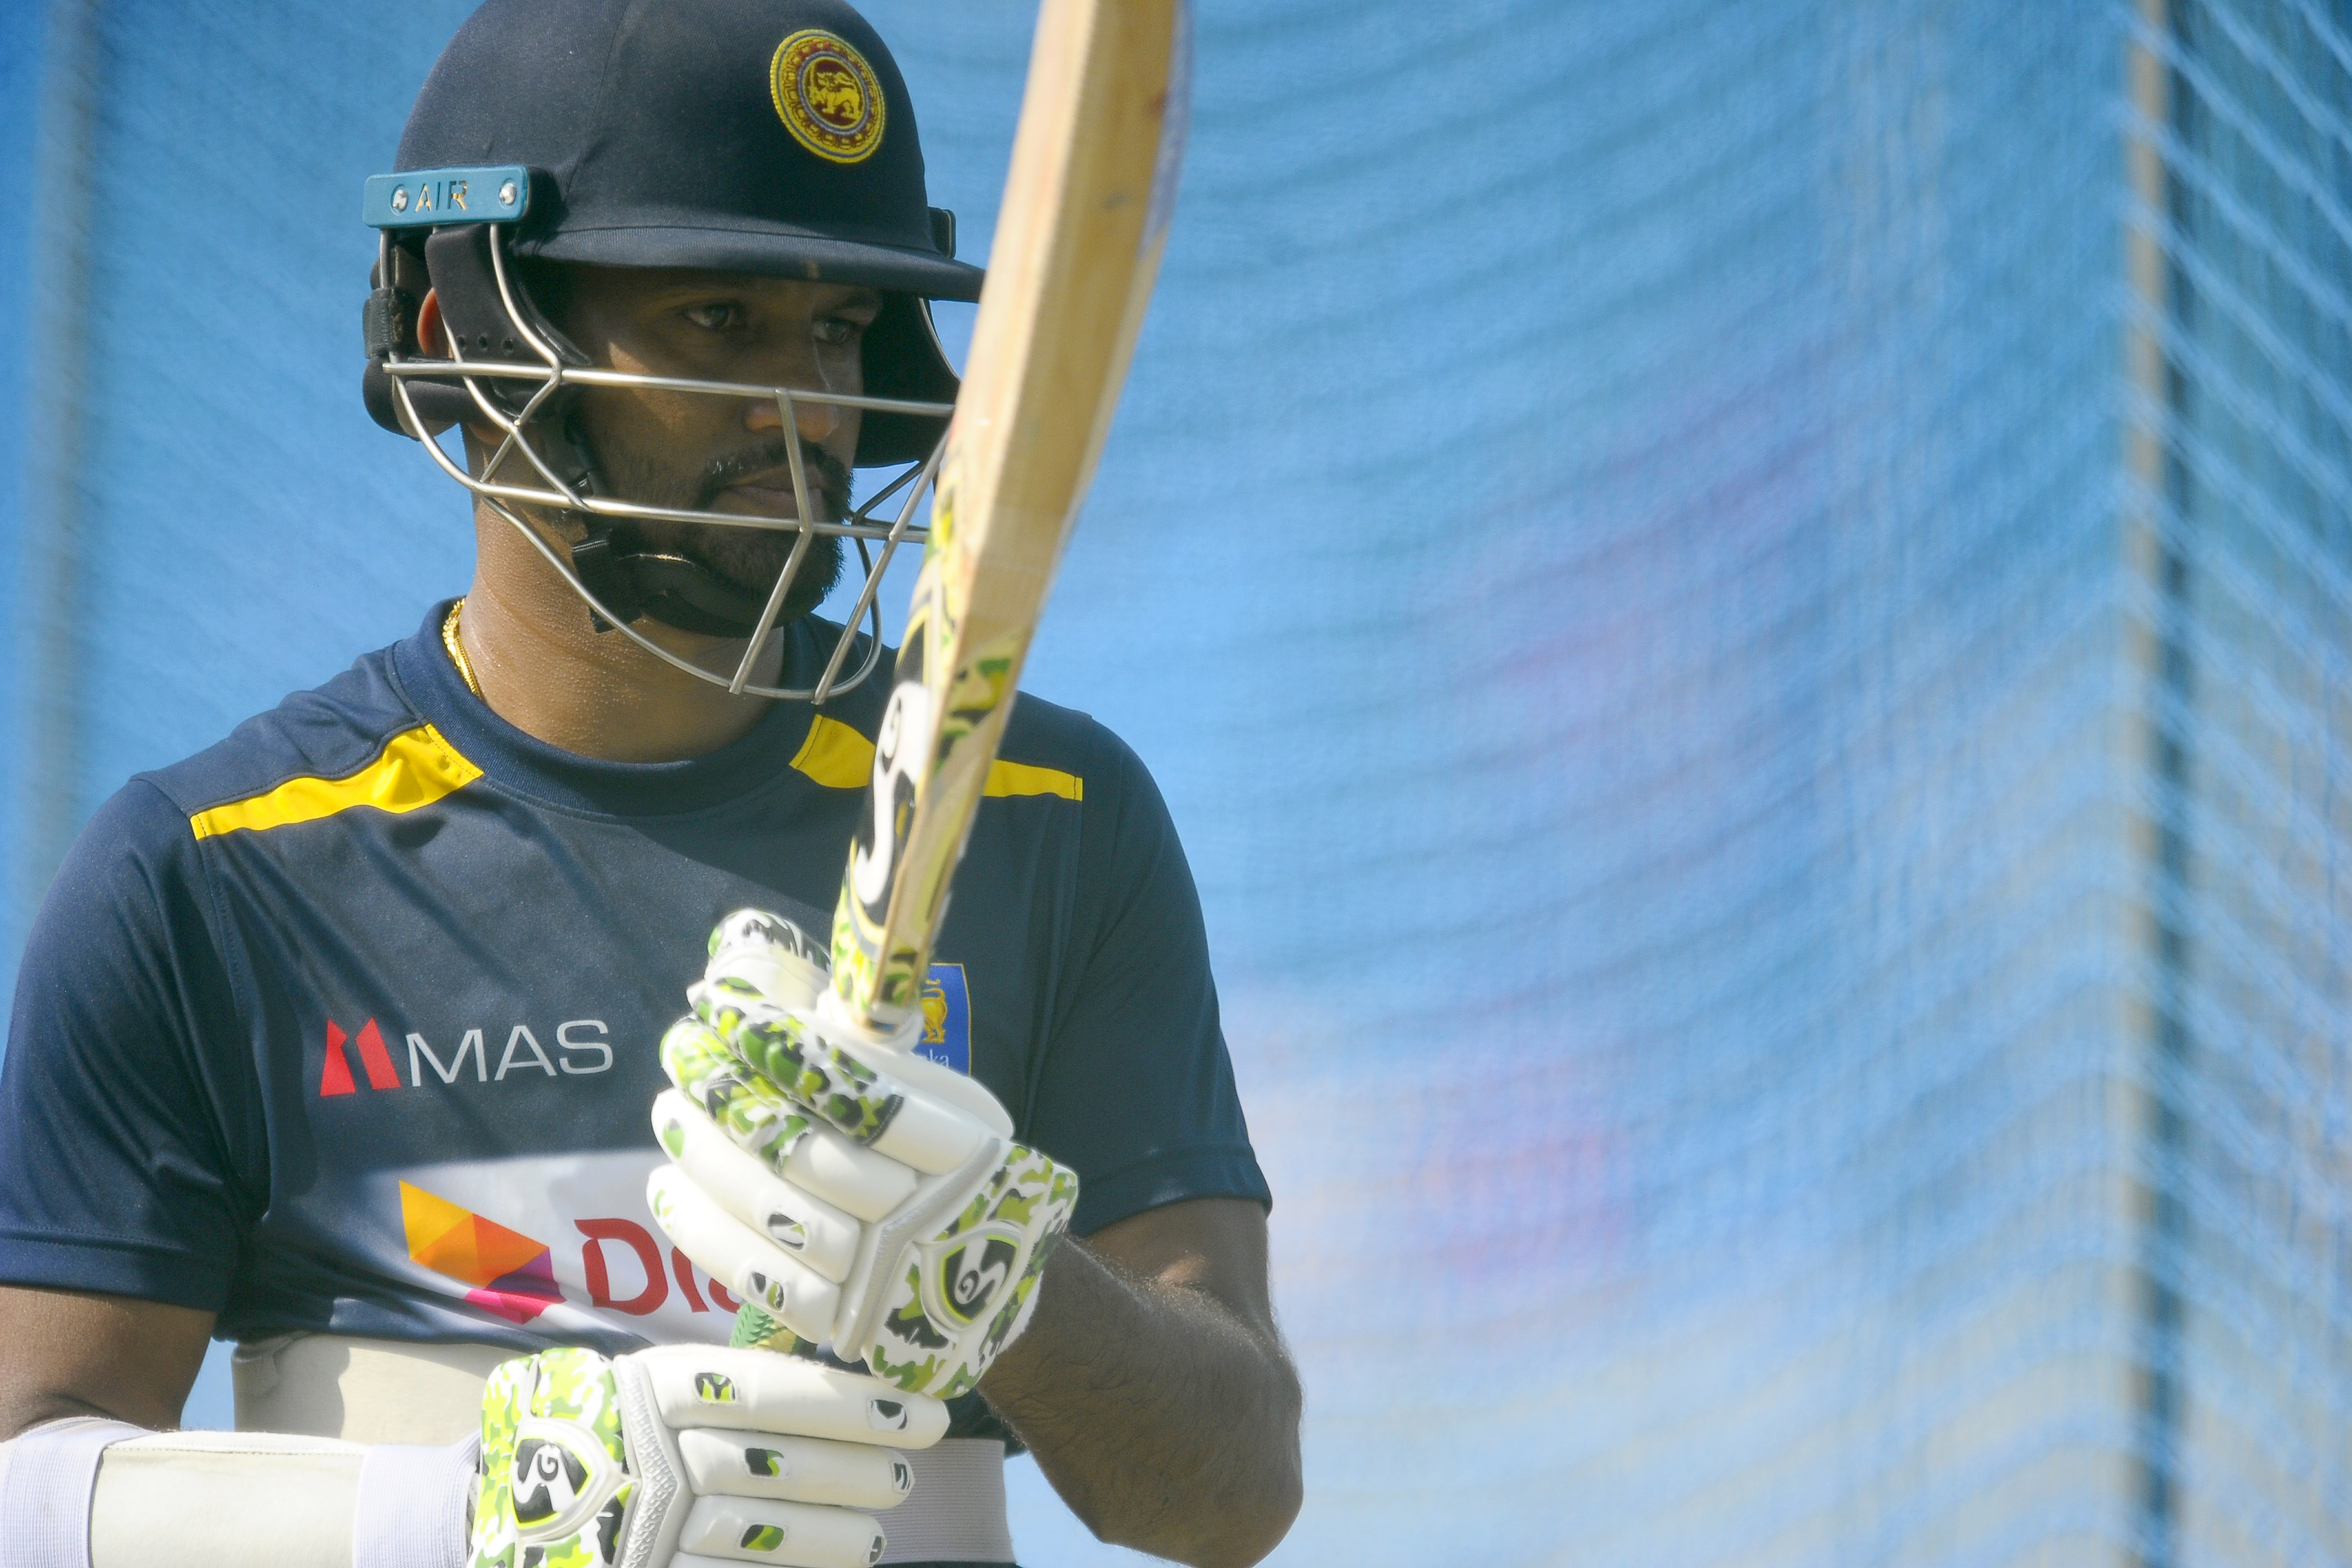 A year of cricket inactivity disappointing, but still focused on 10,000 Test runs – Dimuth Karunaratne